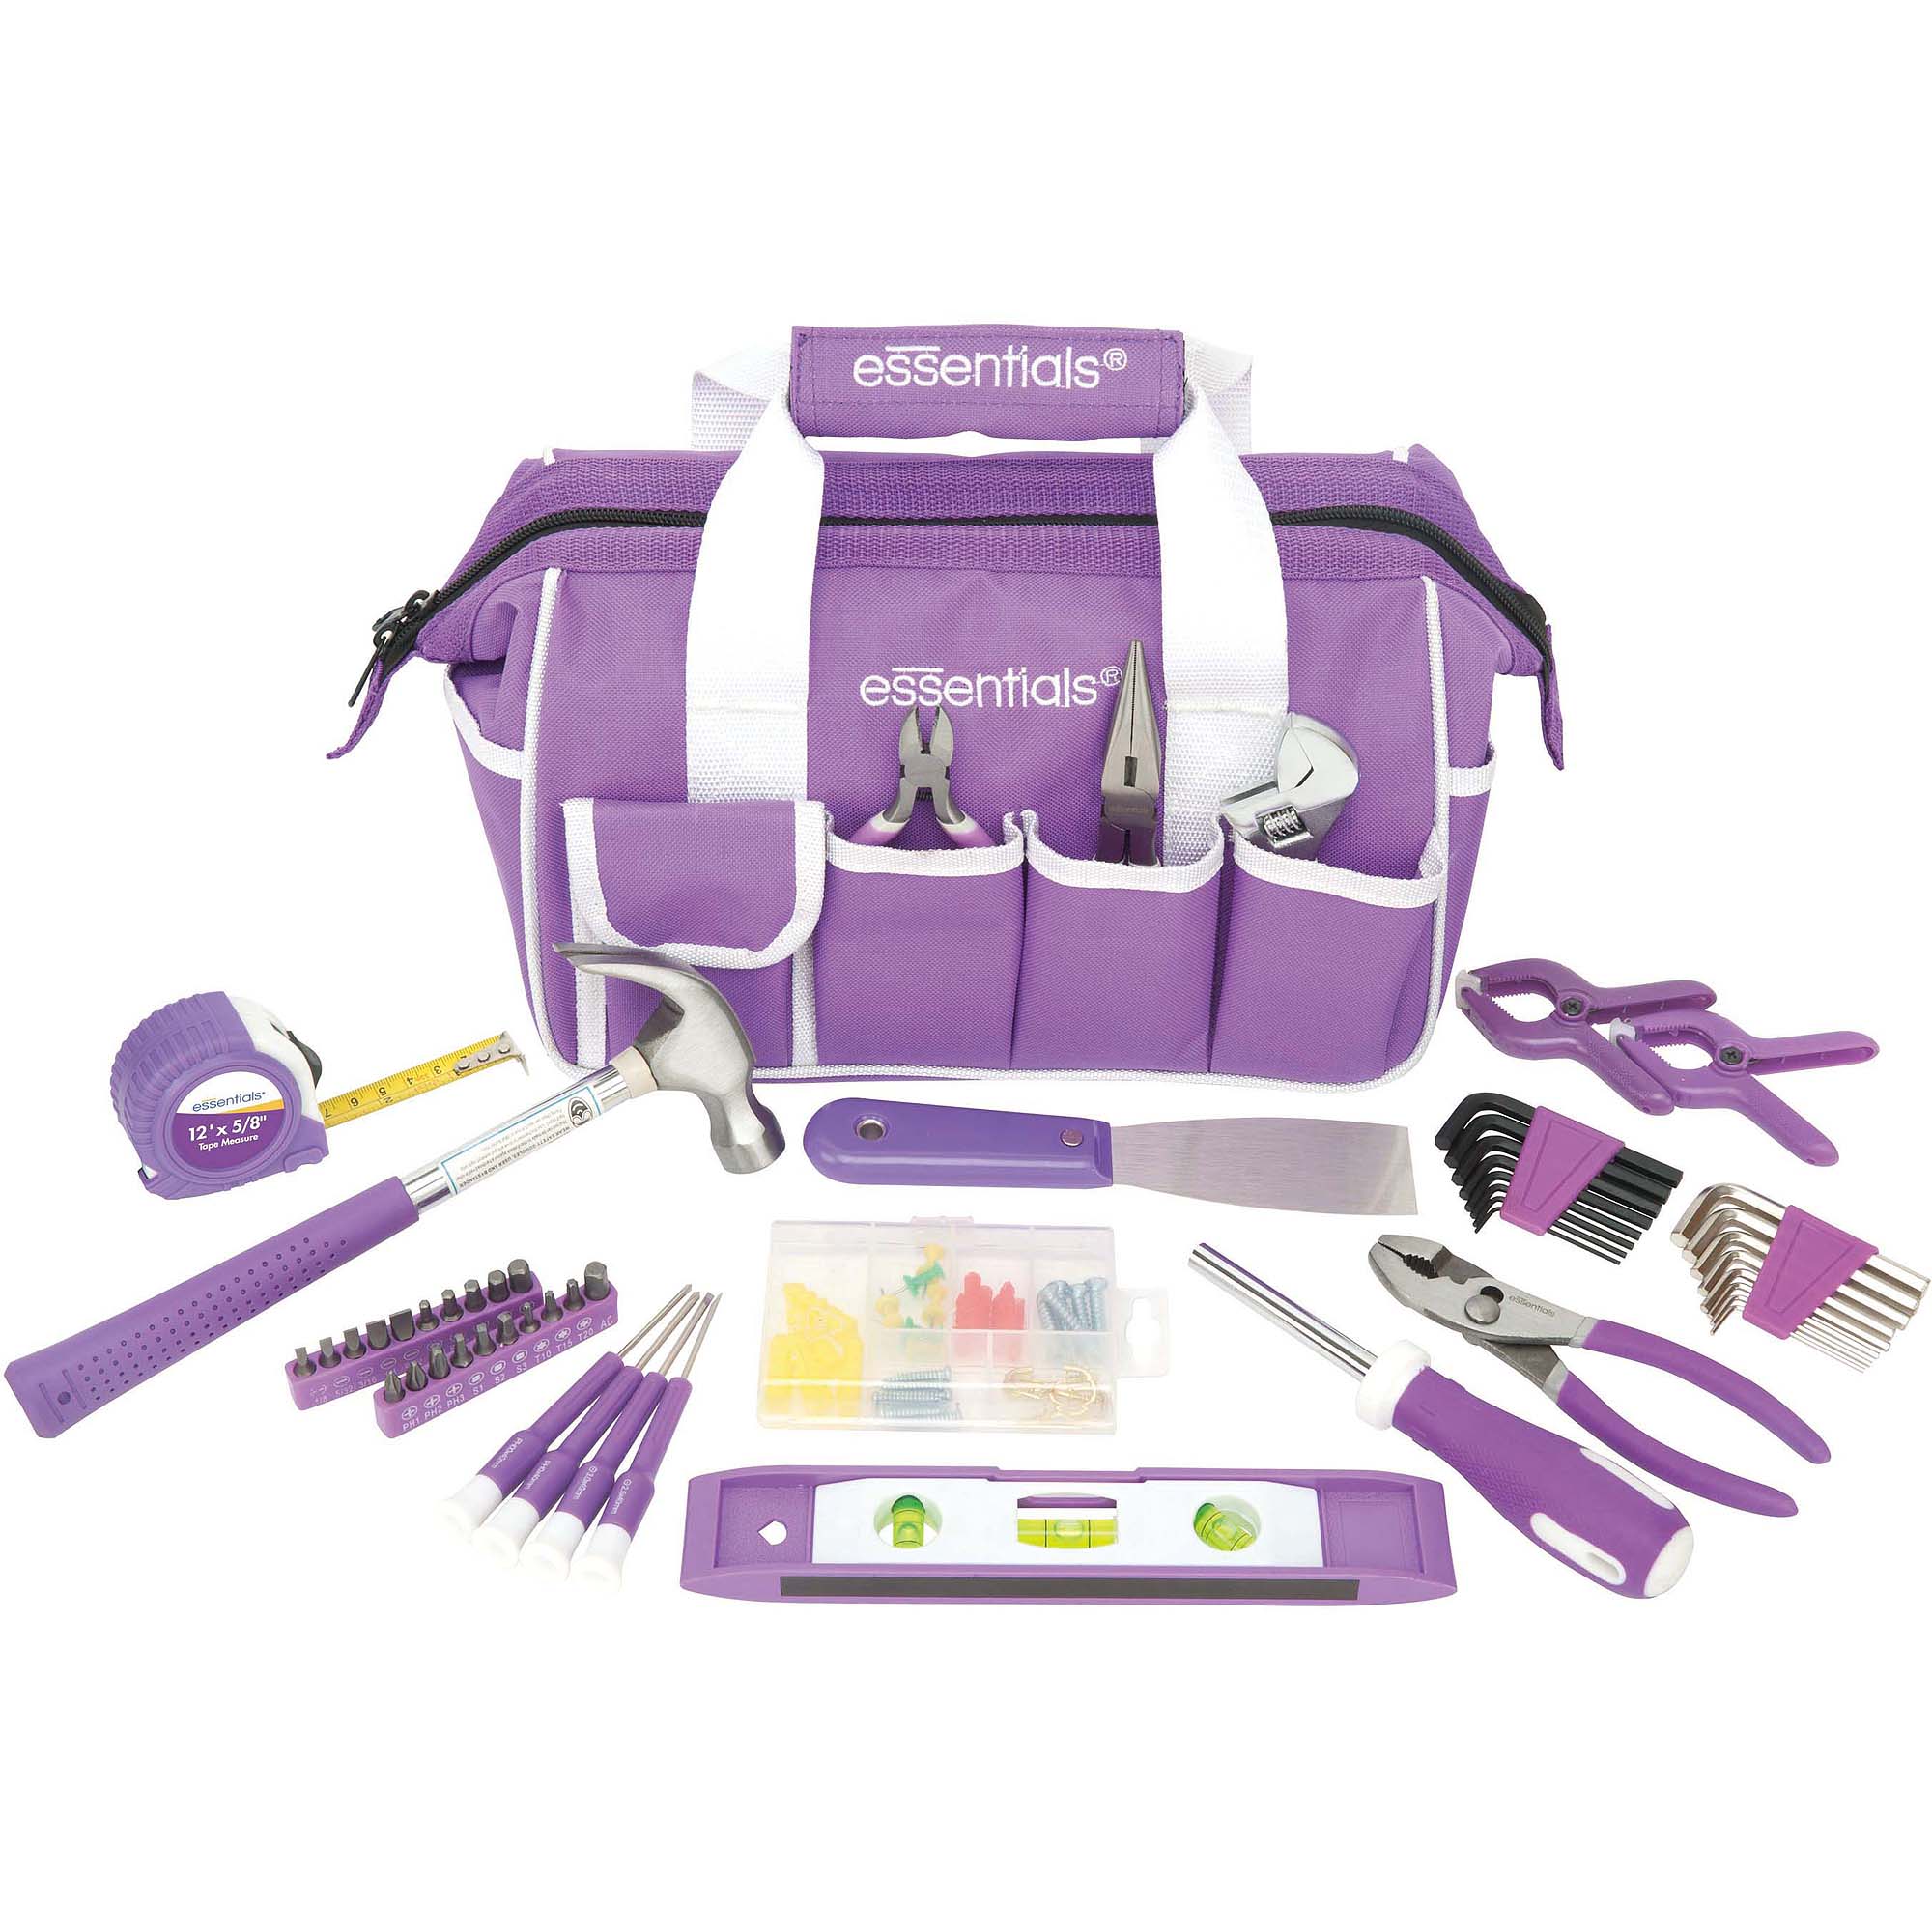 Essentials 53-Piece Around-the-House Basic Tool Kit with Tool Bag for Everyday Use and DIY - image 4 of 5